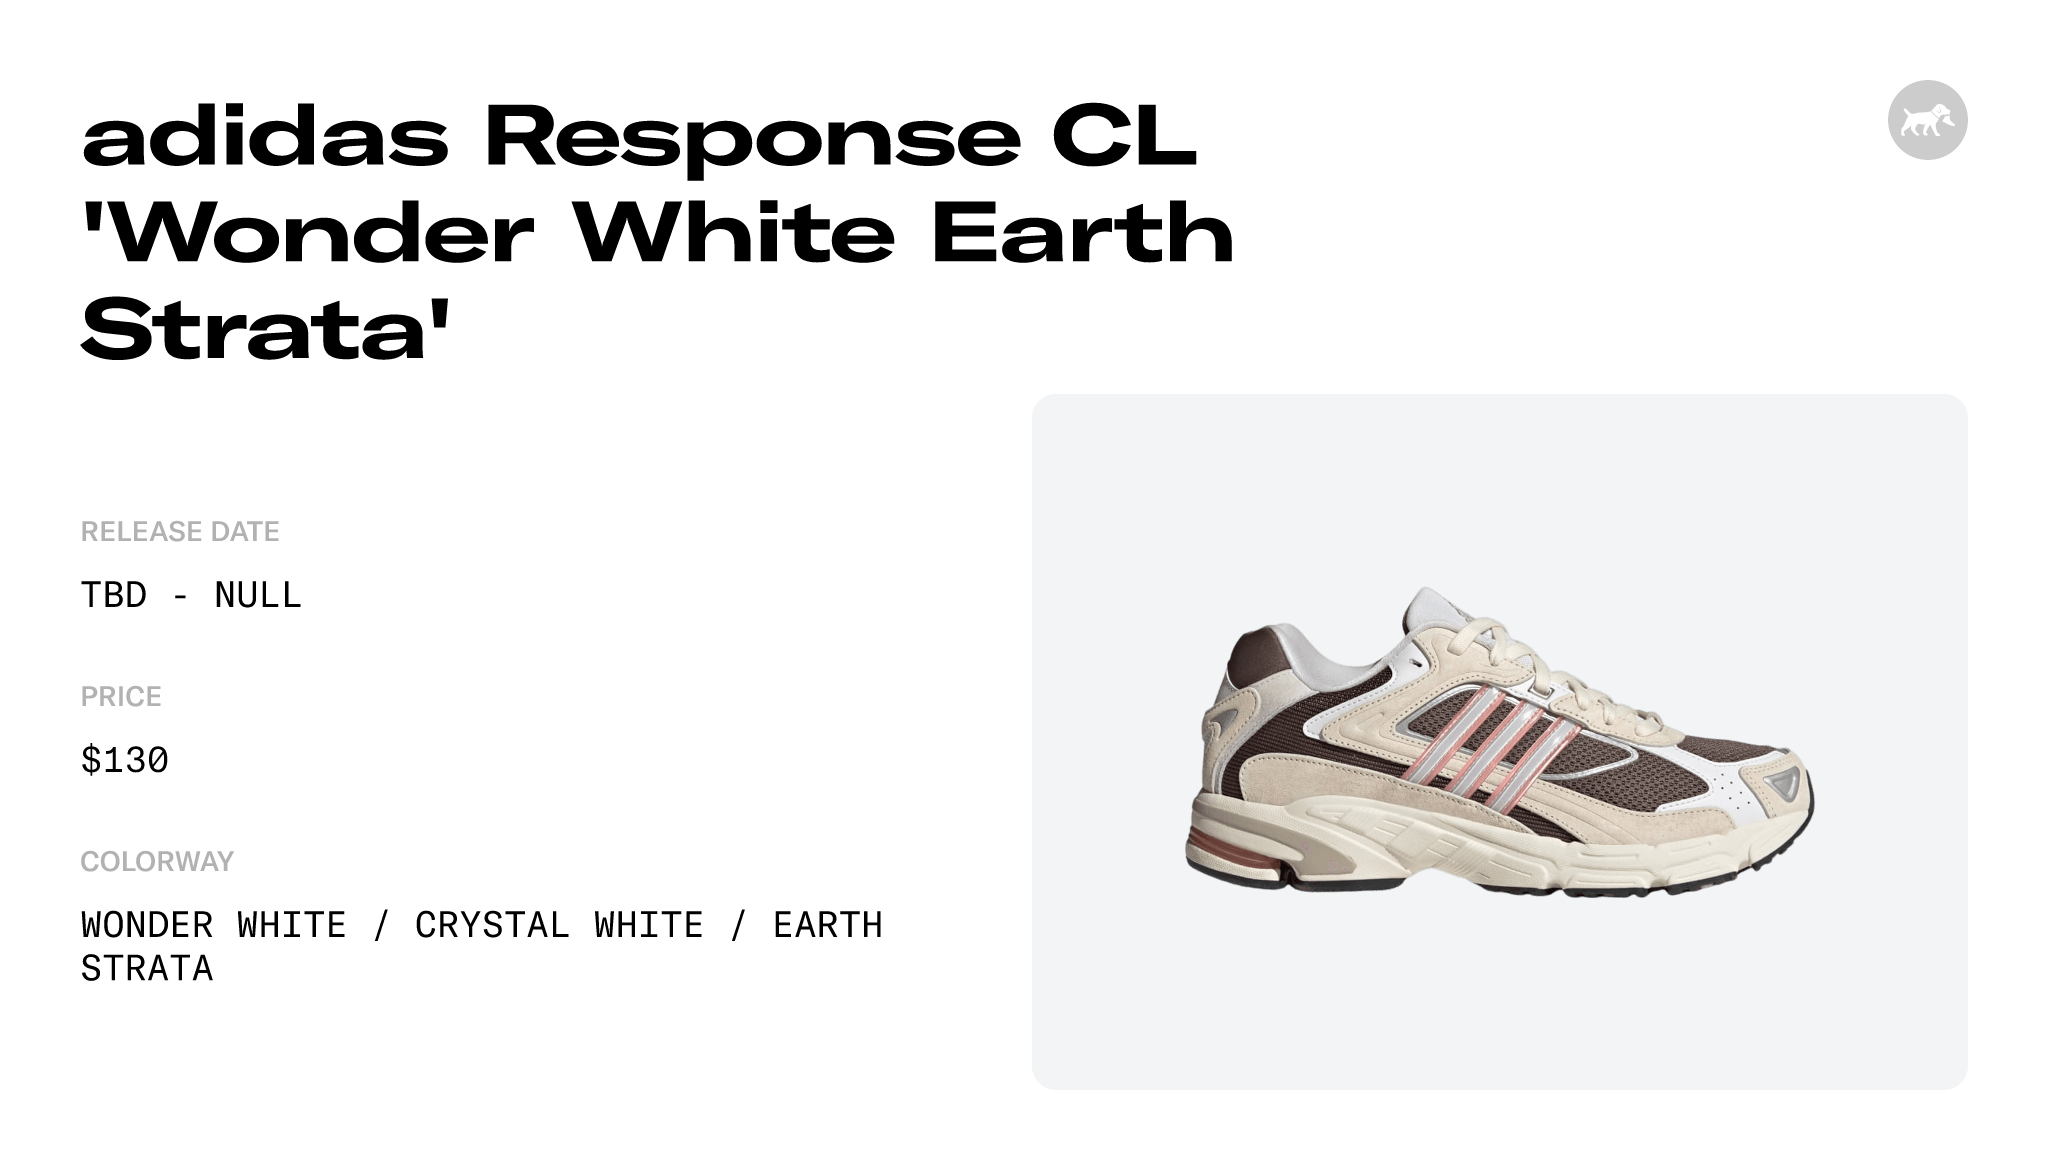 adidas Response CL 'Wonder White Earth Strata' - IG3079 Raffles and Release  Date